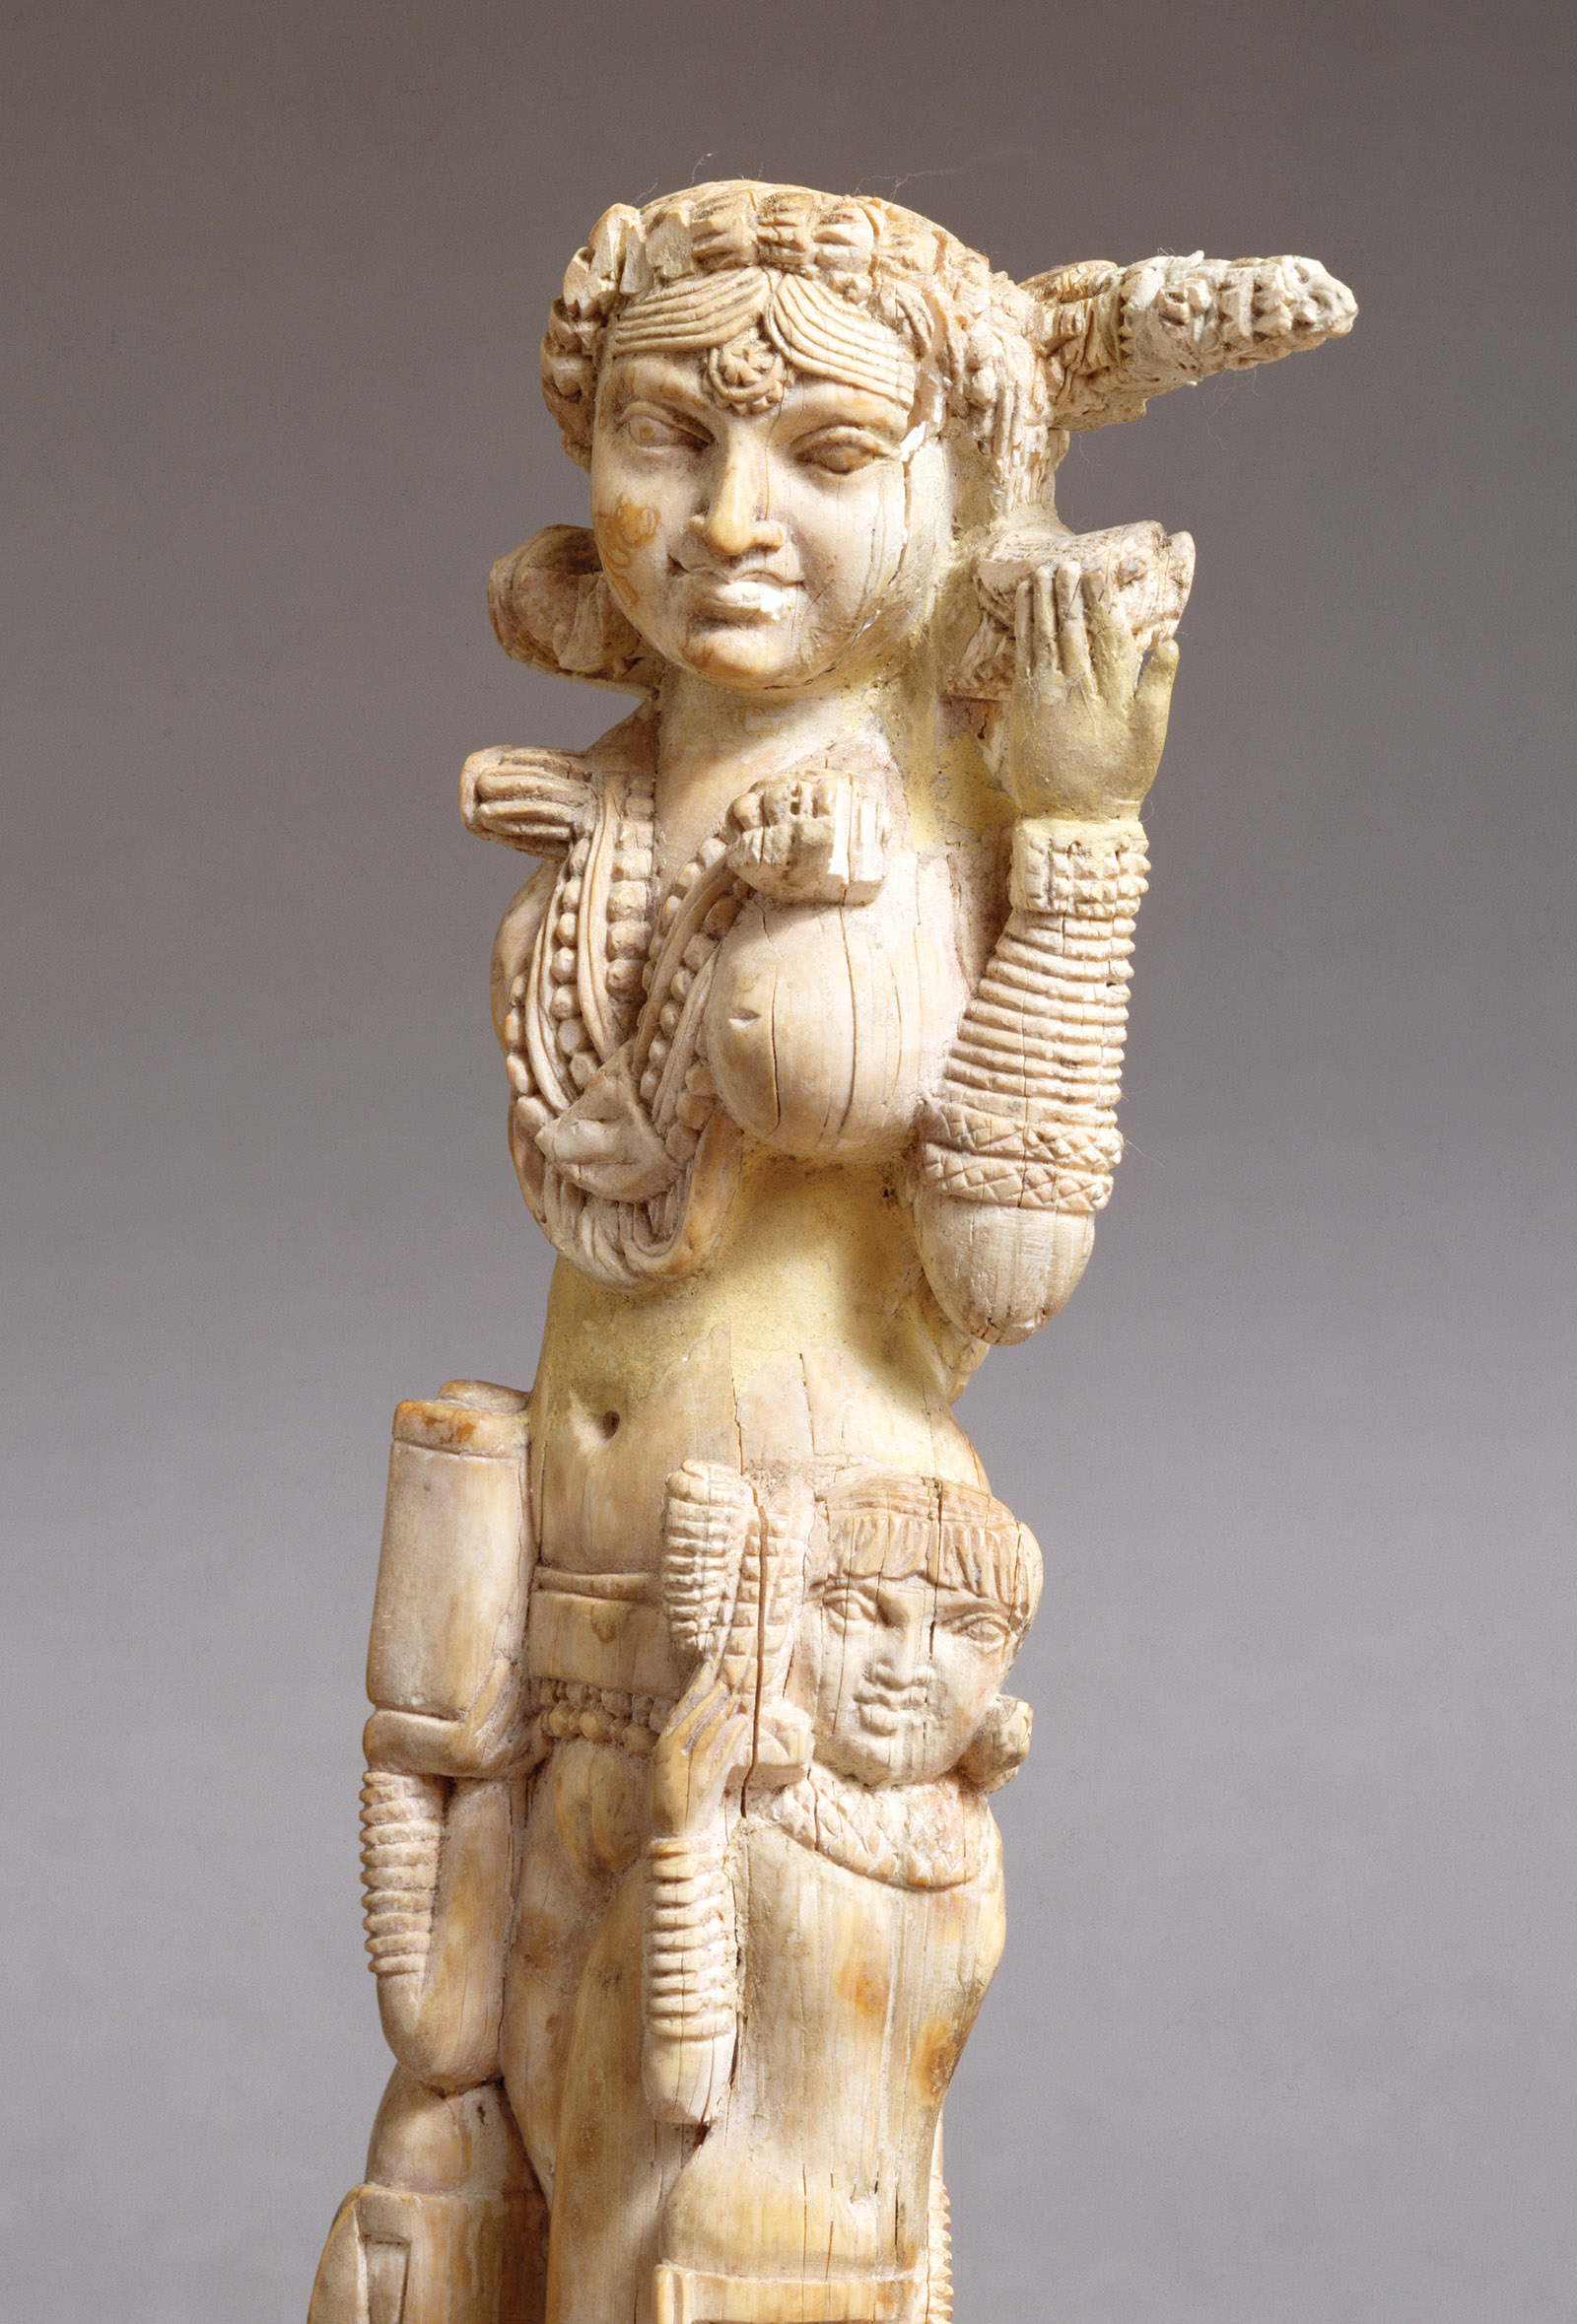 An Indian ivory figure of a yakshi fertility spirit unearthed at Pompeii